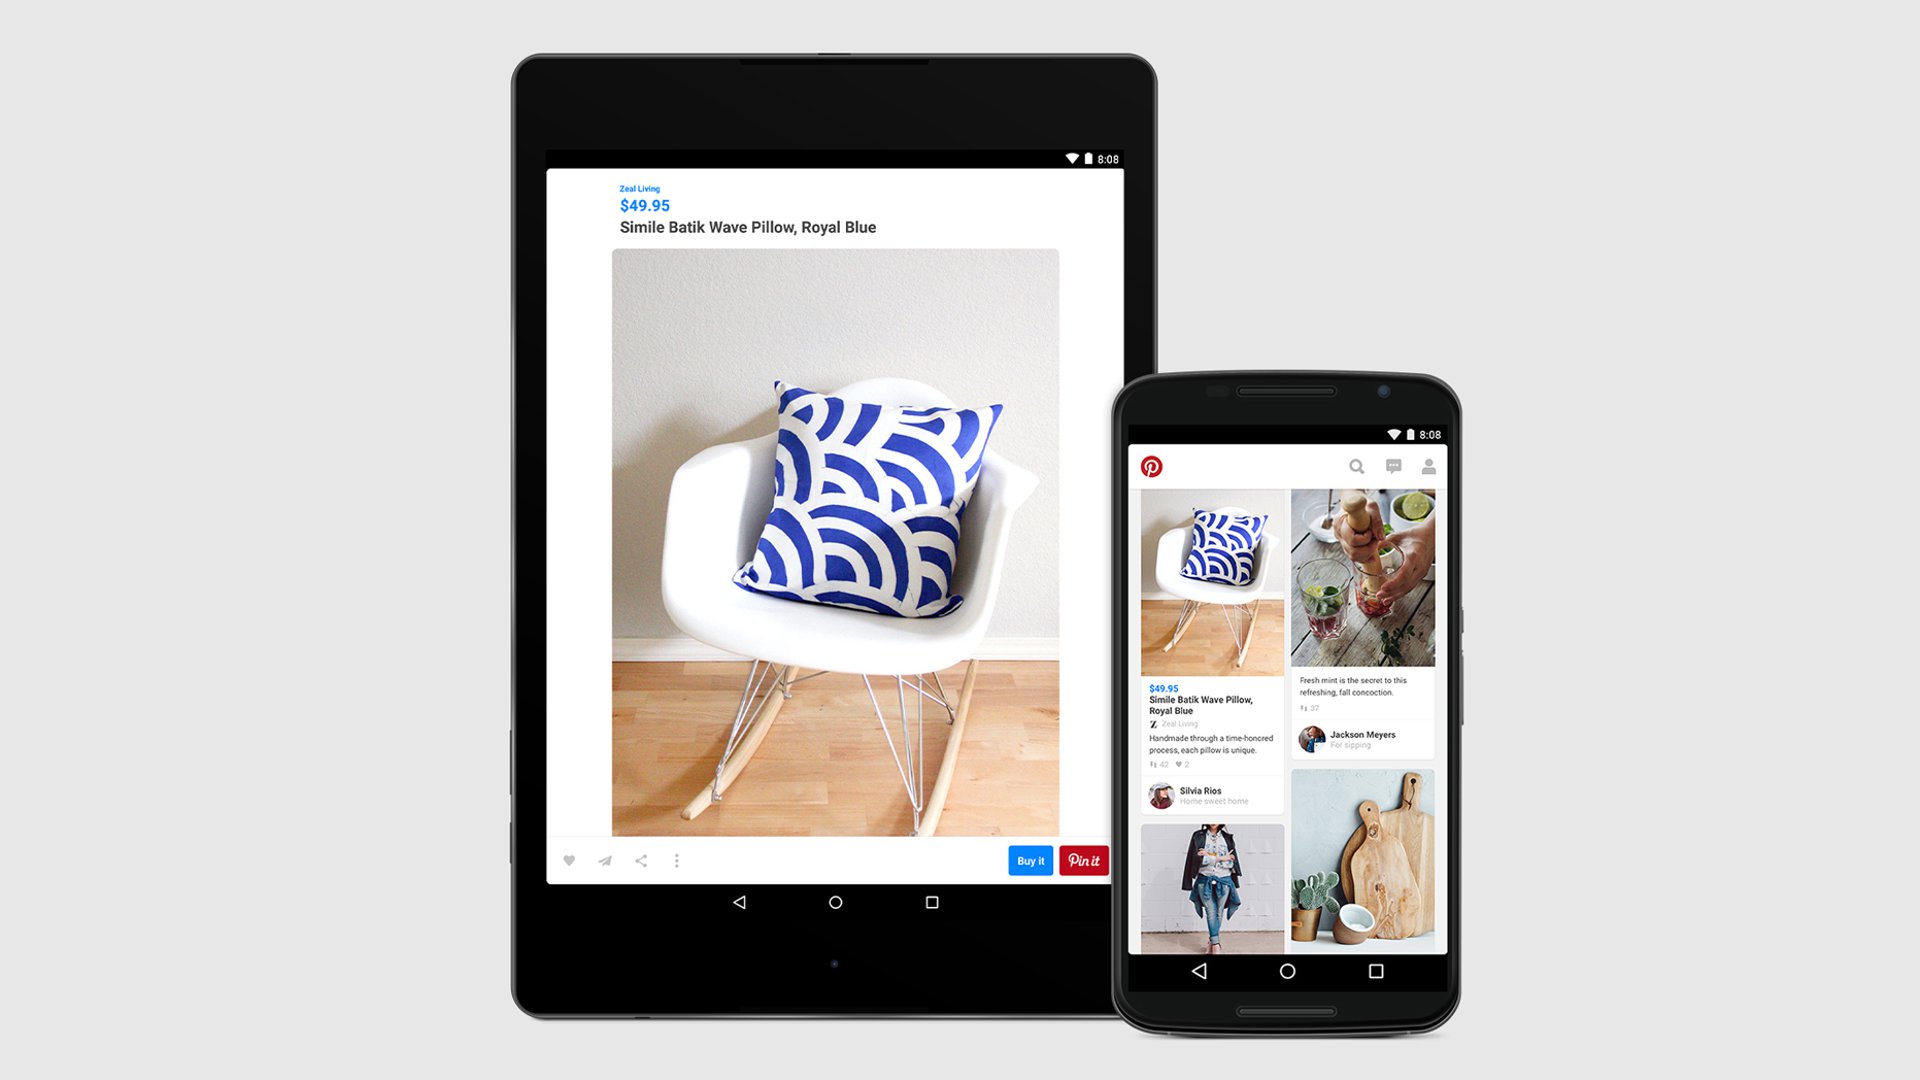 Pinterest - Buyable Pins For Android